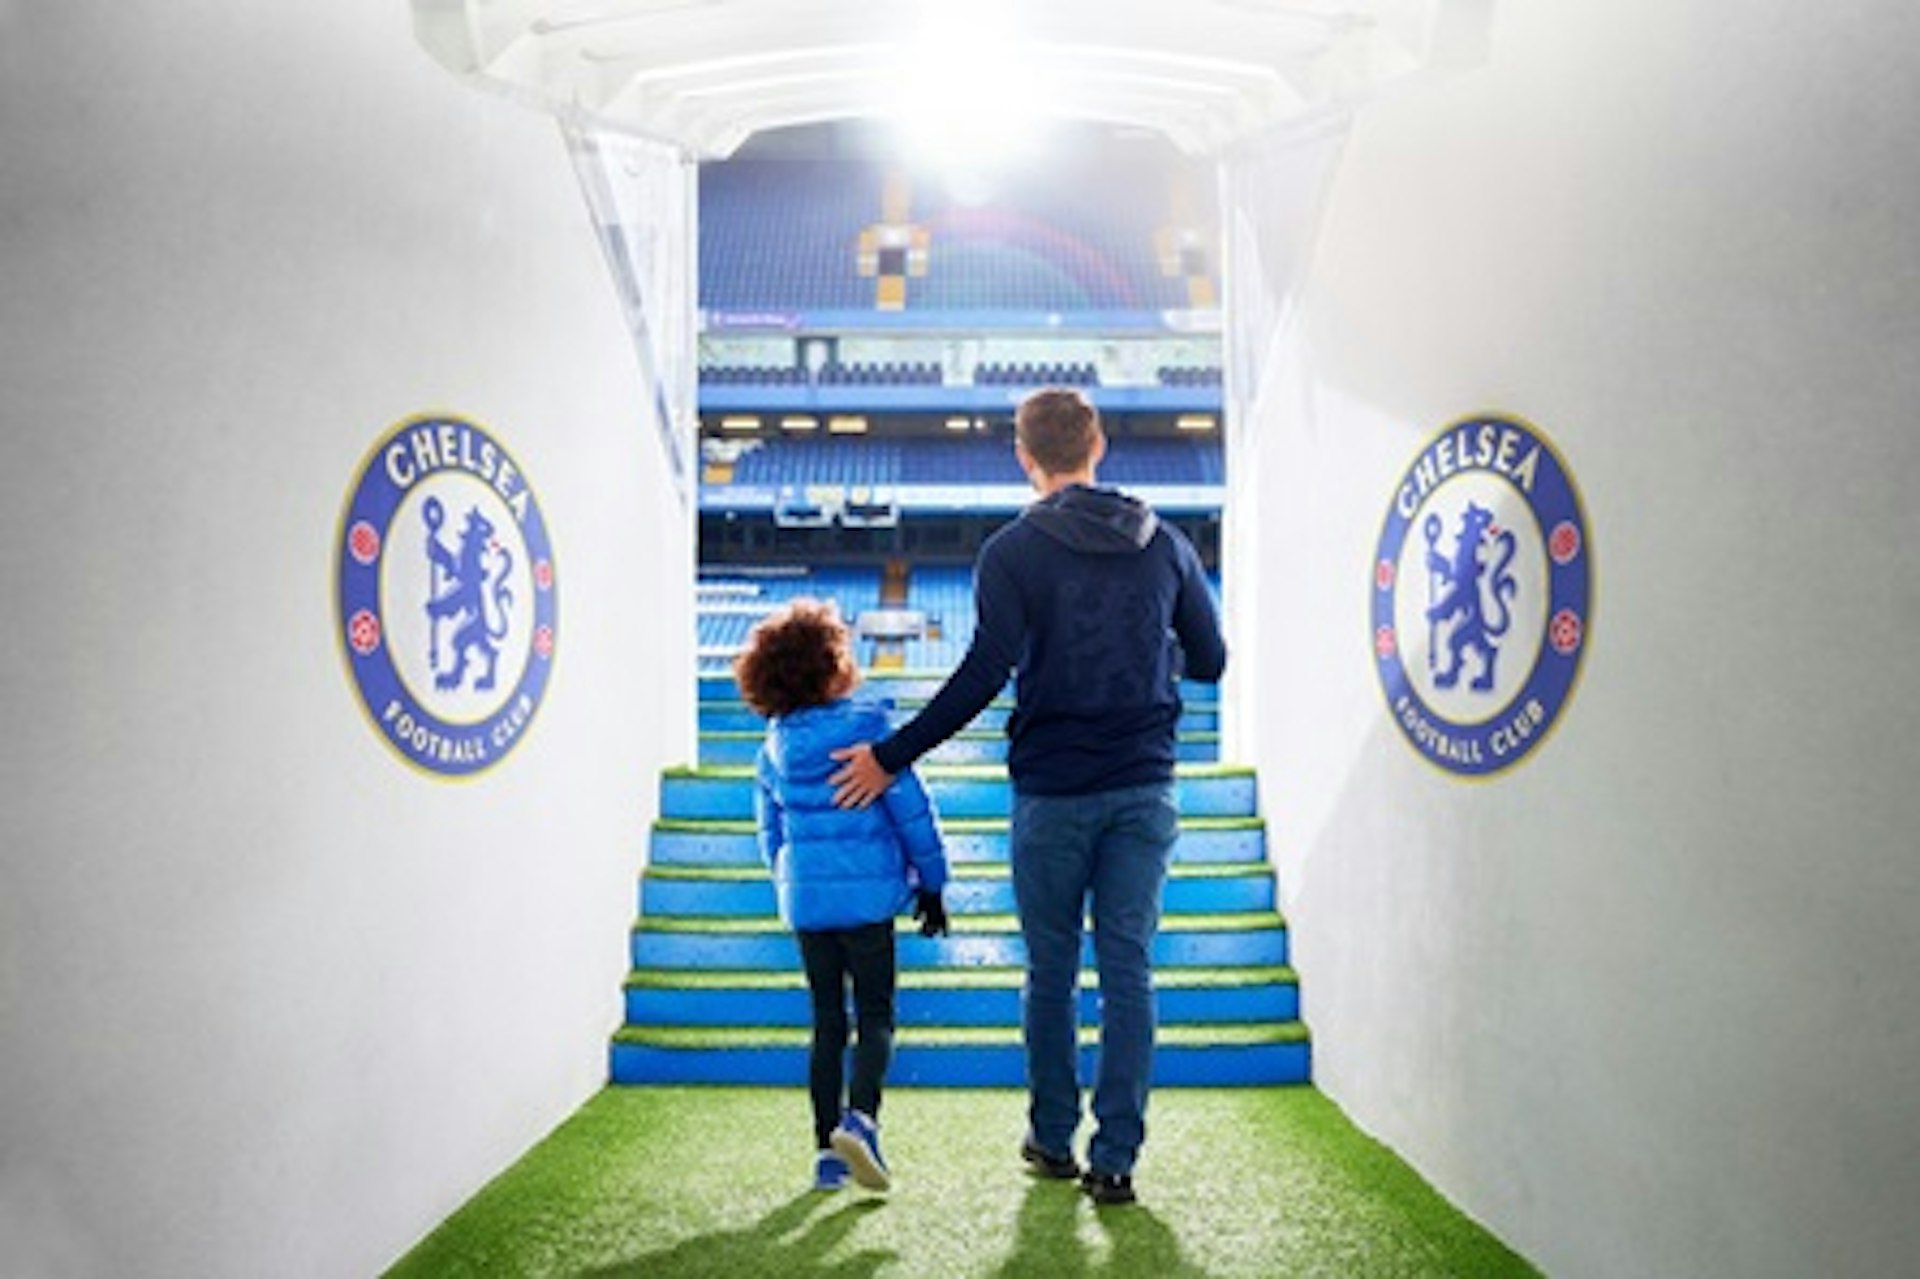 Chelsea Football Club Stadium Tour for One Adult and One Child 2